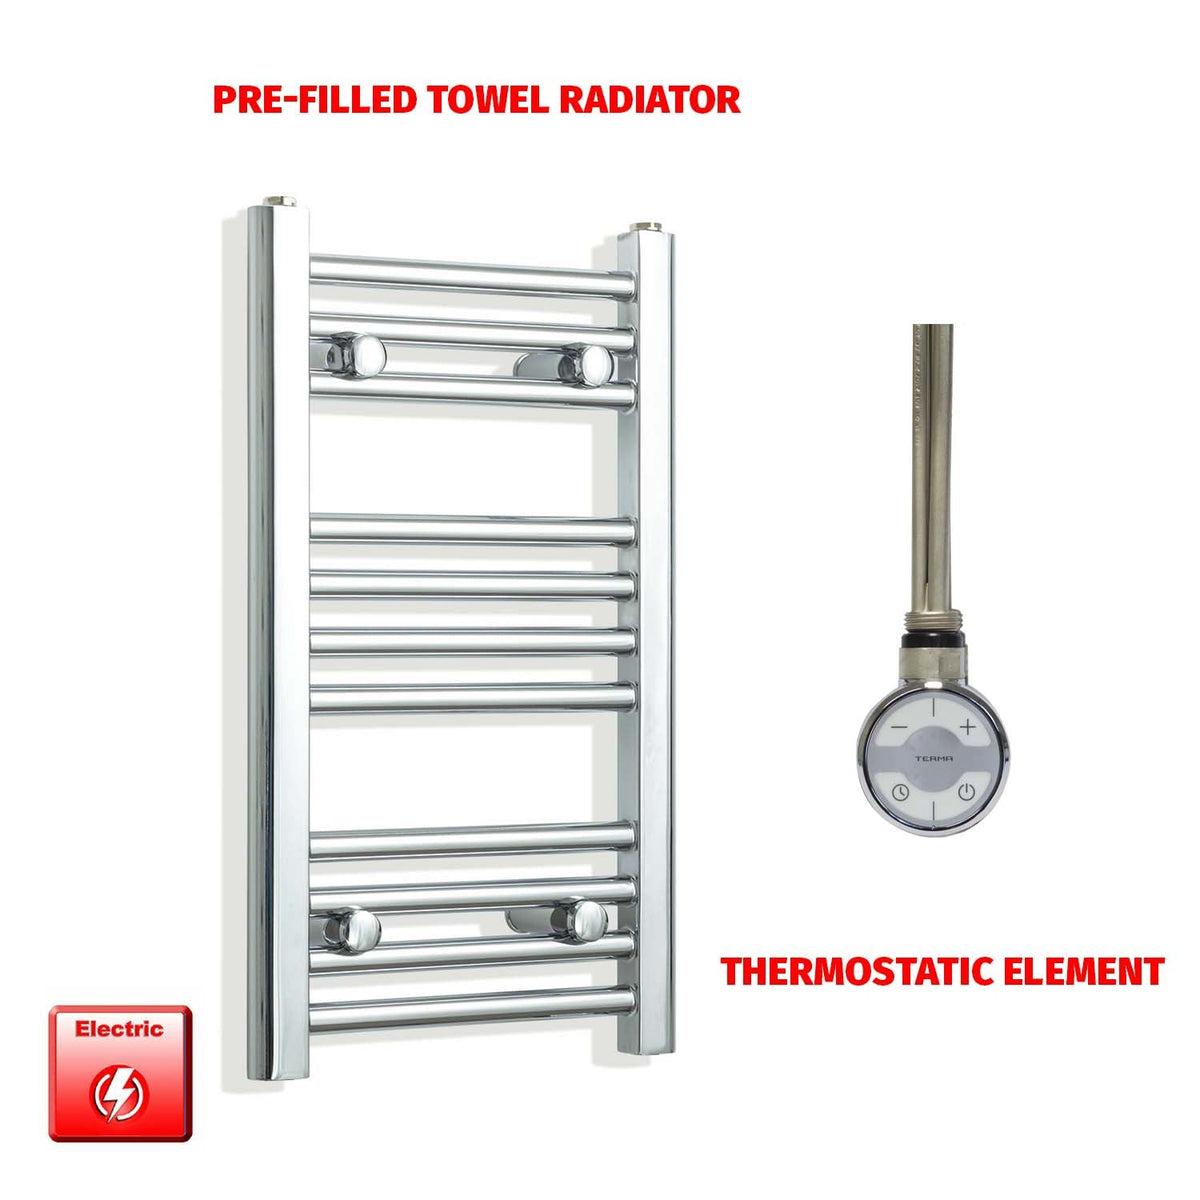 600 x 300 Pre-Filled Electric Heated Towel Radiator Straight Chrome MOA Element No Timer